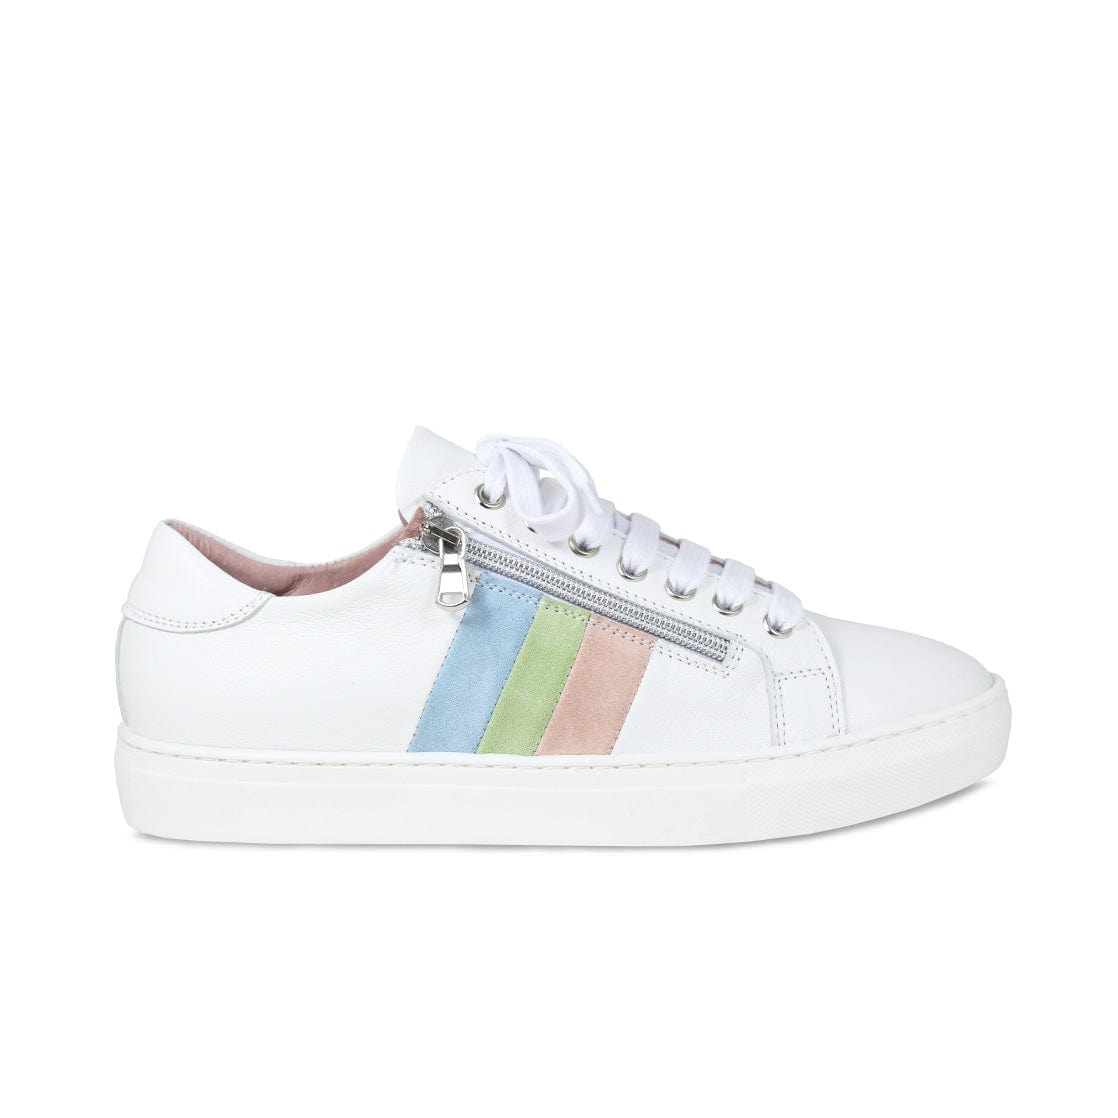 Sprint: White Leather & Pastel - Sneakers for Bunions | Sole Bliss USA